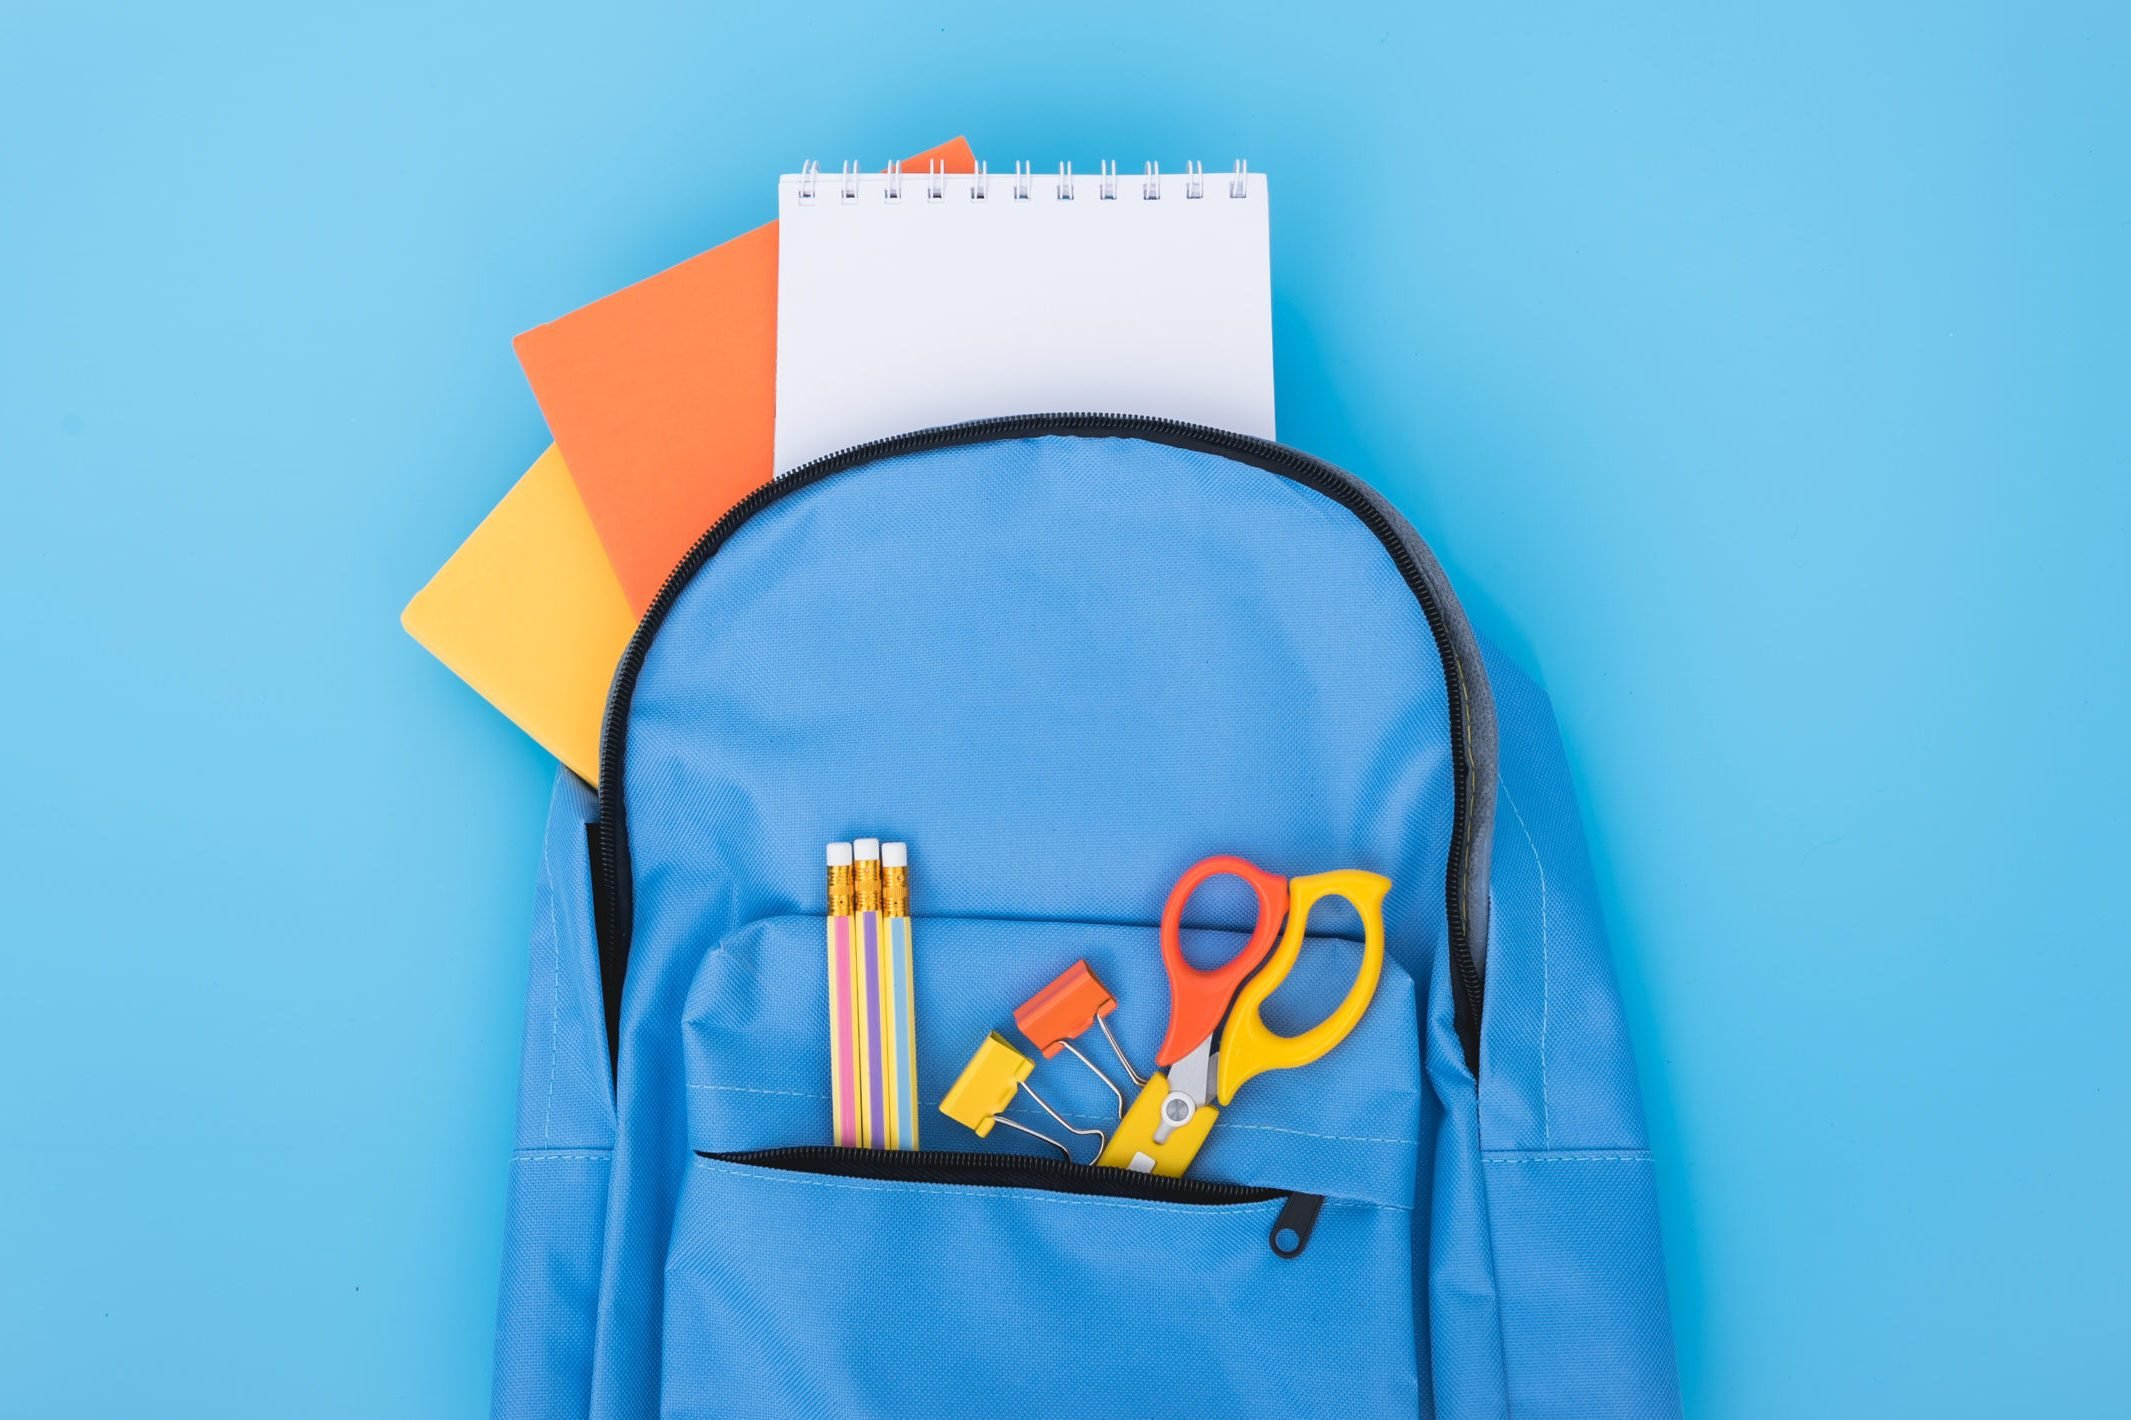 Under $1 School Supplies You Can Buy at Target | Reader's Digest